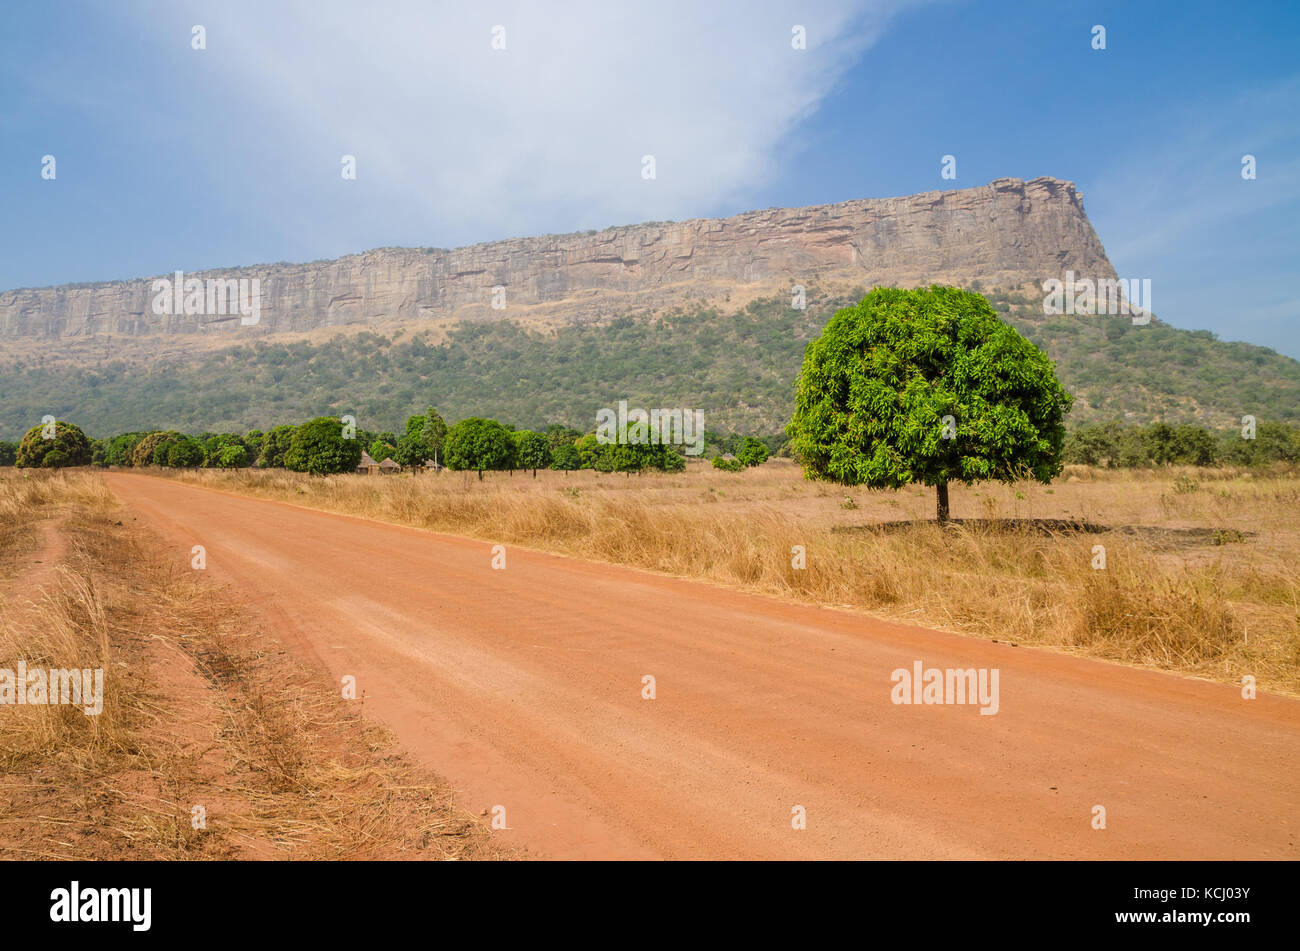 Red dirt and gravel road, single trees and large flat topped mountain in Fouta Djalon region, Guinea, West Africa Stock Photo